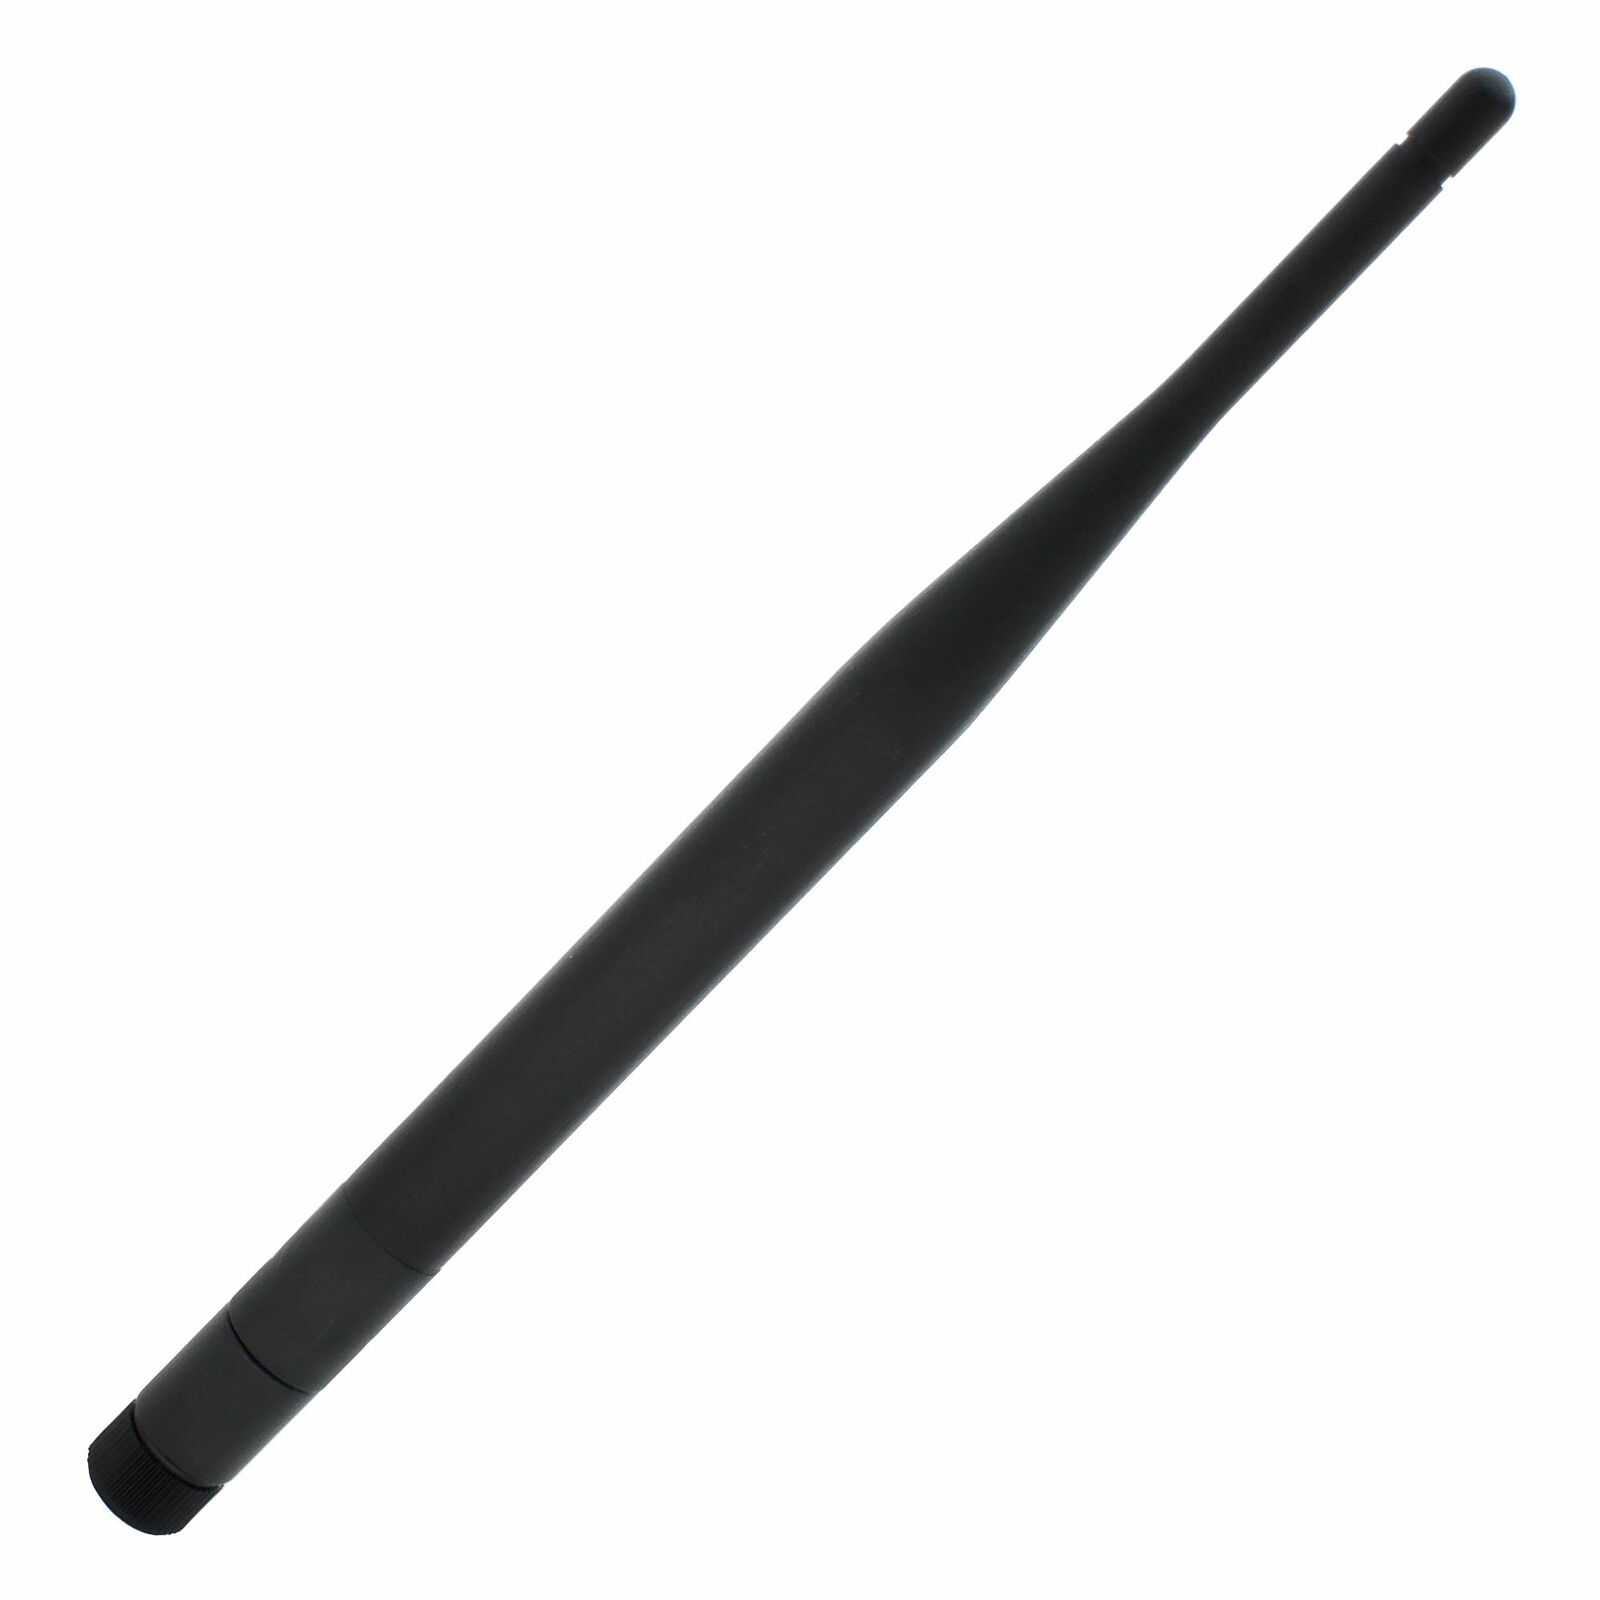 Shopcorp GSM Omni Directional Antenna – SMA 3G 4G LTE Bands with 5 dBi Gain